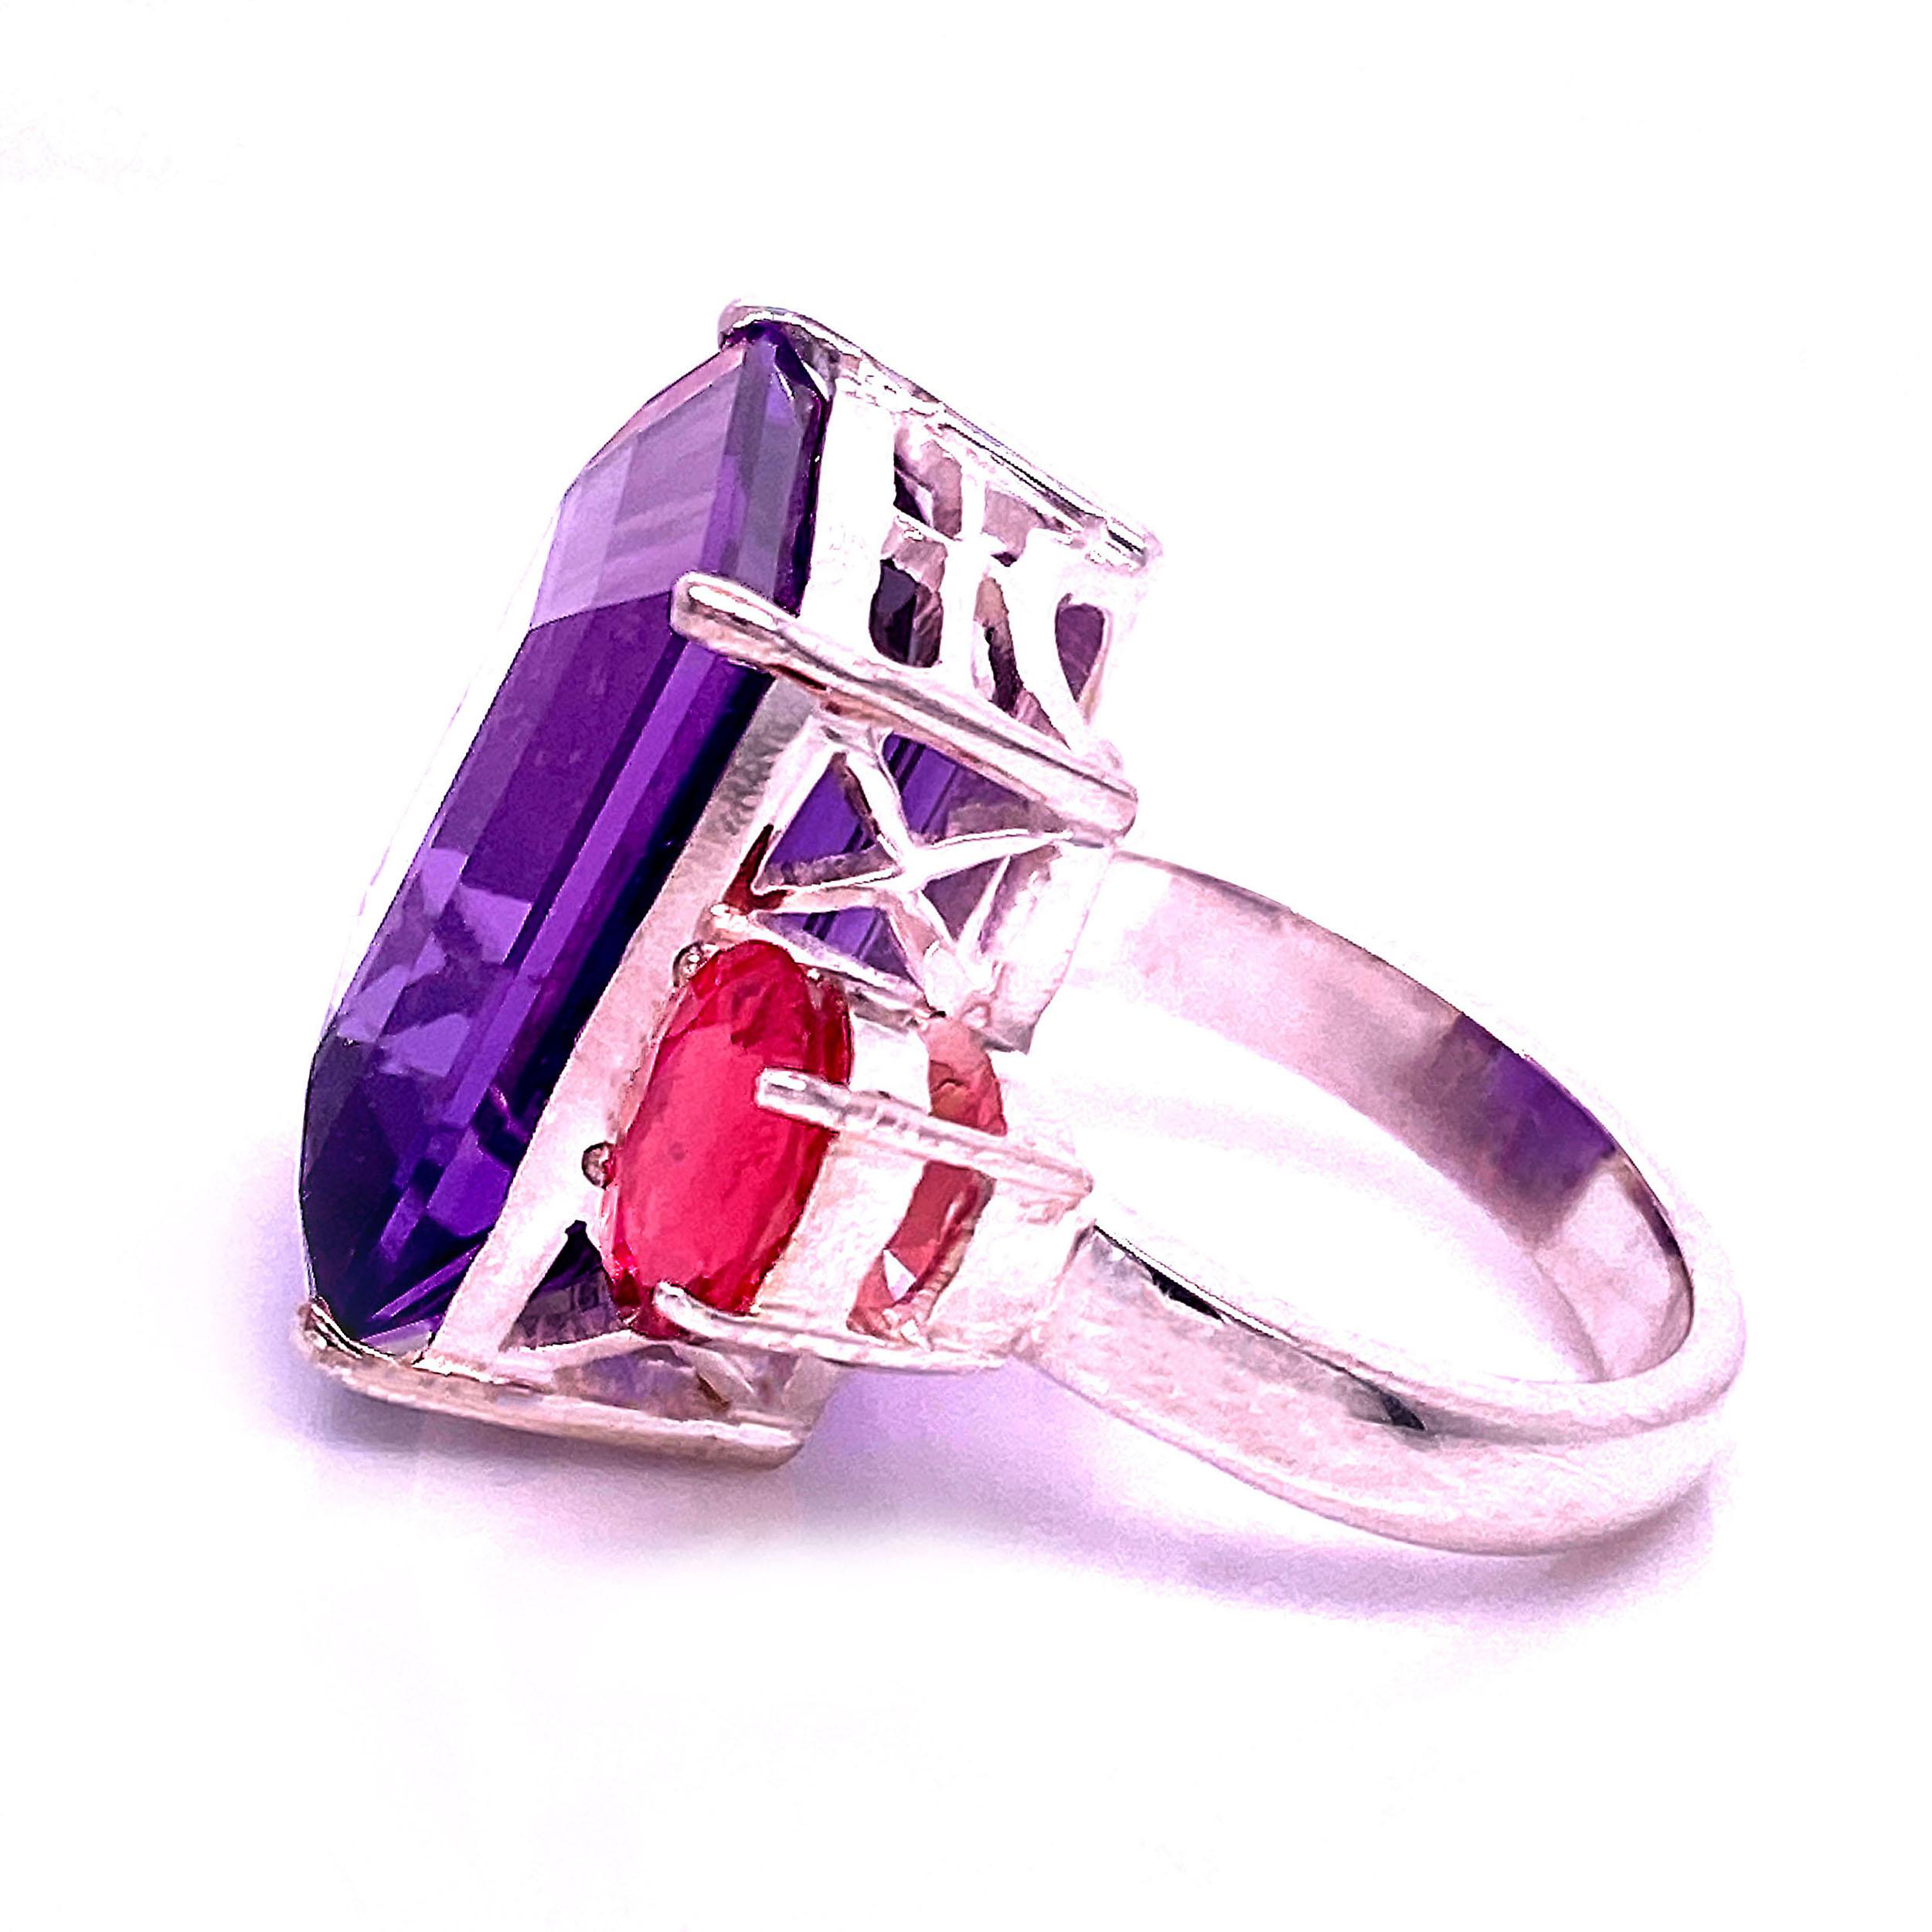 Life of the Party Pink and Purple Ring!  Sparkling emerald cut Amethyst accented with side stones of hot pink Tourmaline.  Wear this show stopper out to dinner, be prepared to accept the compliments as you tip that champagne glass to your lips! This